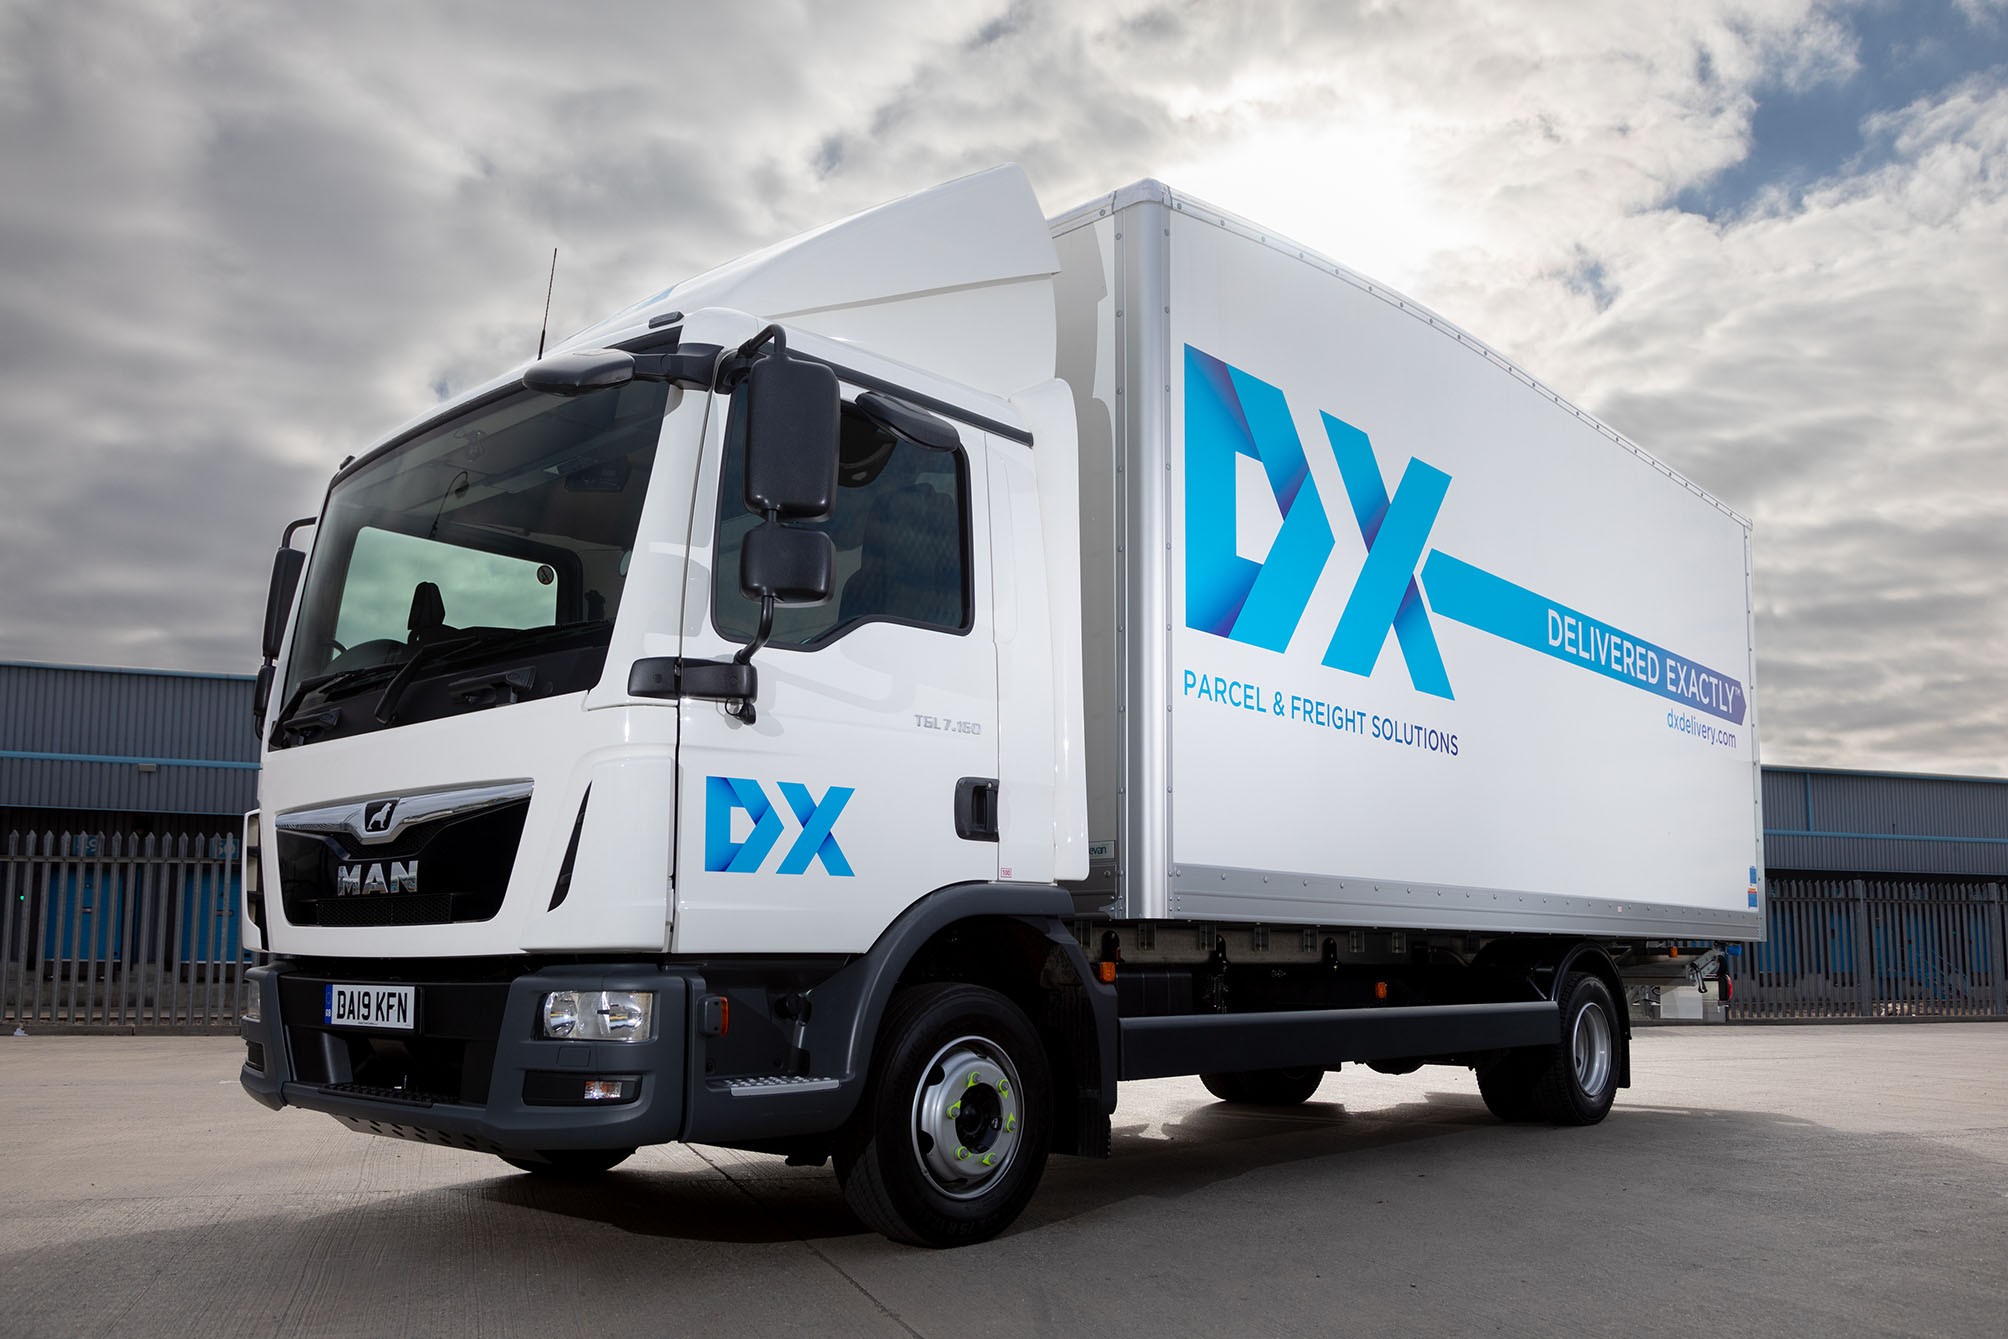 Bevan Group’s ‘one-stop shop’ service delivers for DX